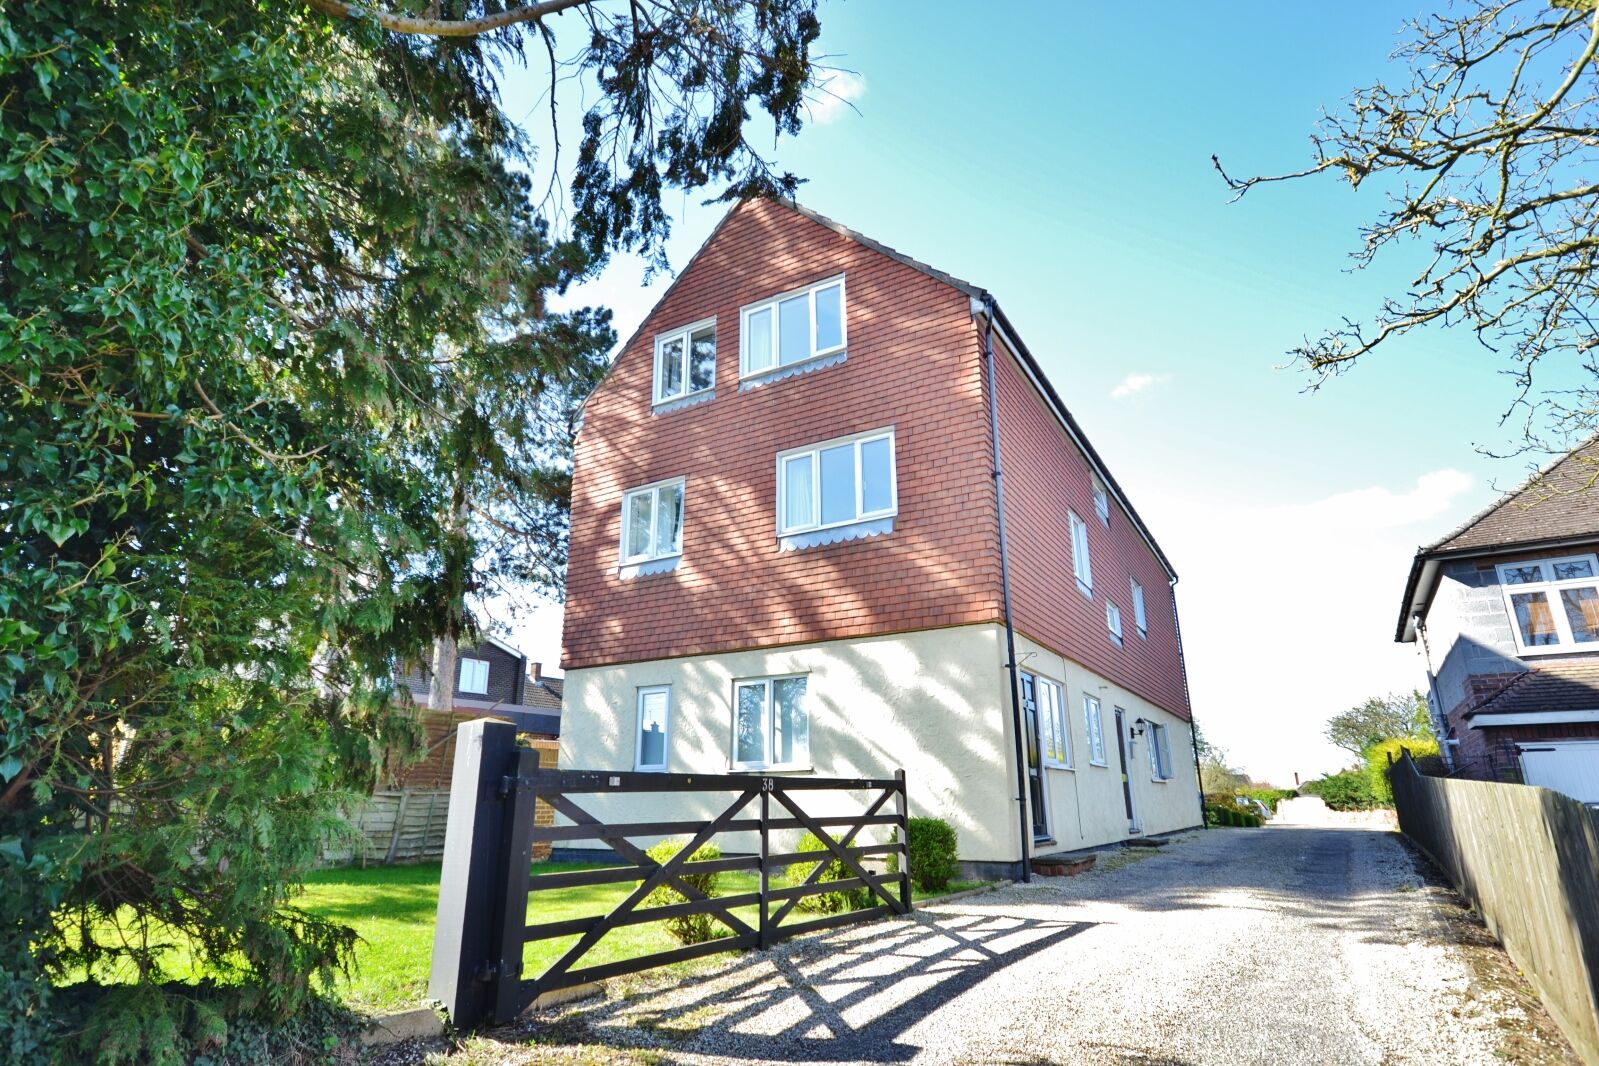 2 bedroom  flat to rent, Available now 38 Pleasant Valley, Saffron Walden, CB11, main image